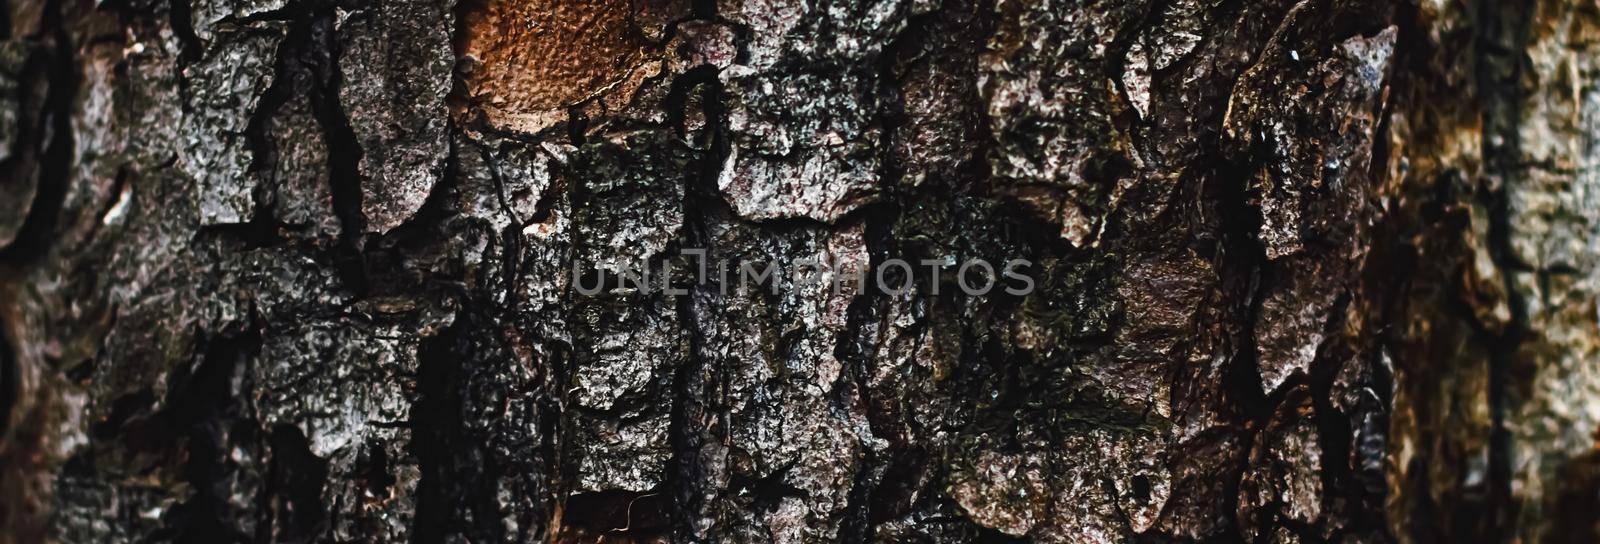 Natural wood, tree texture as wooden background, environment and nature closeup